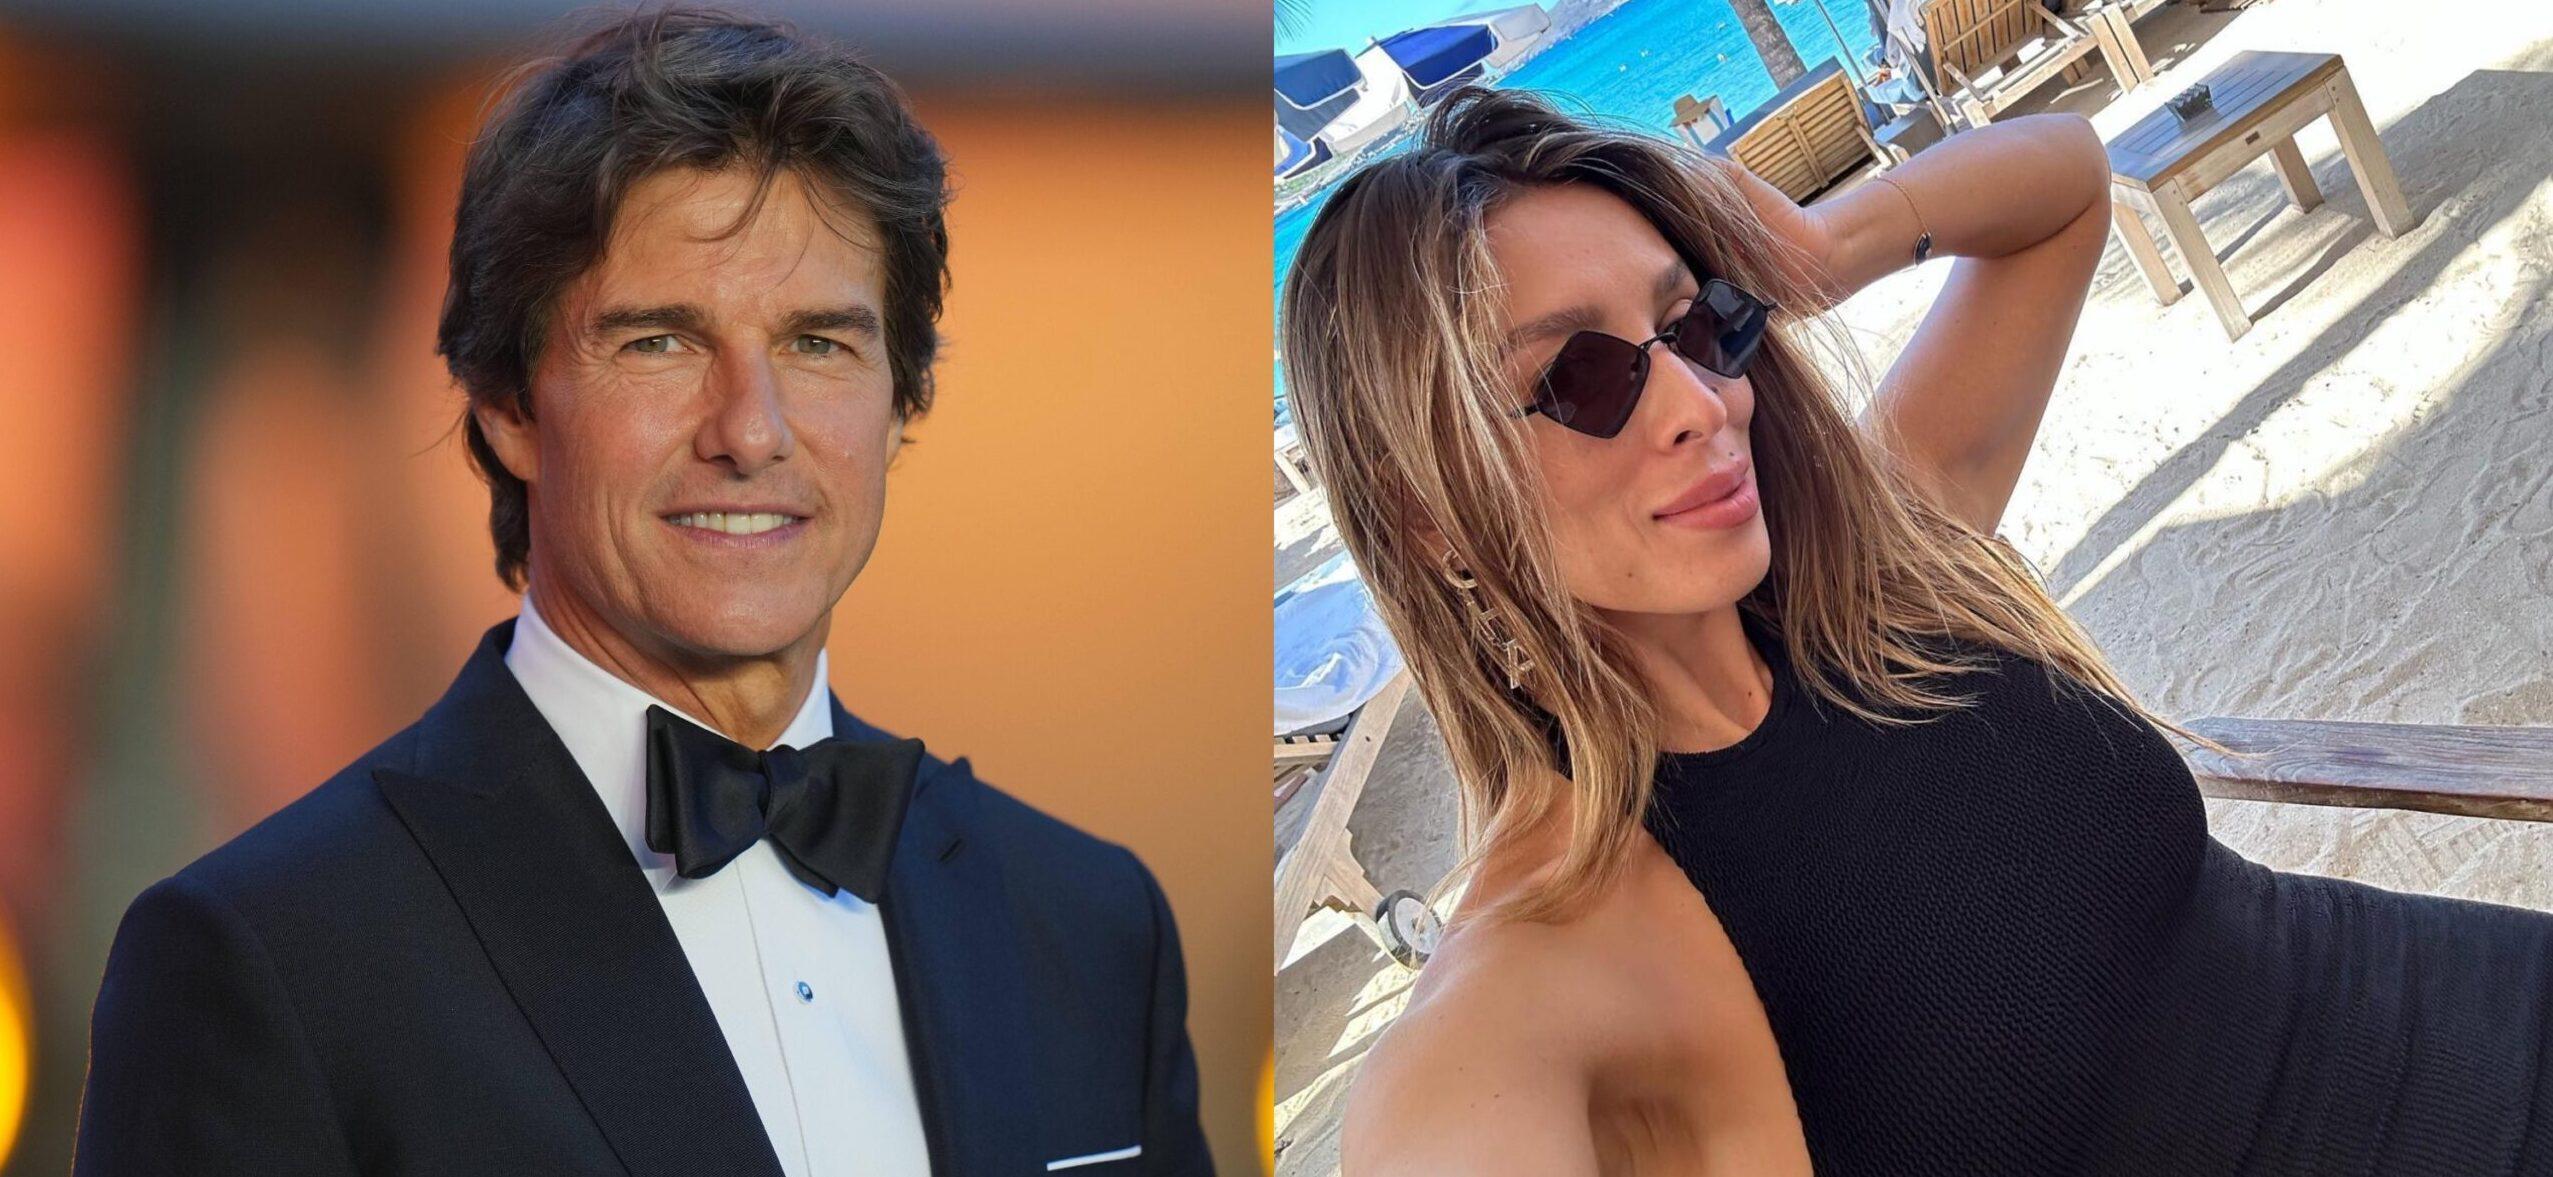 Tom Cruise’s Romance With Russian Socialite Ended Due To The Actor’s Alleged ‘Marriage’ Proposal